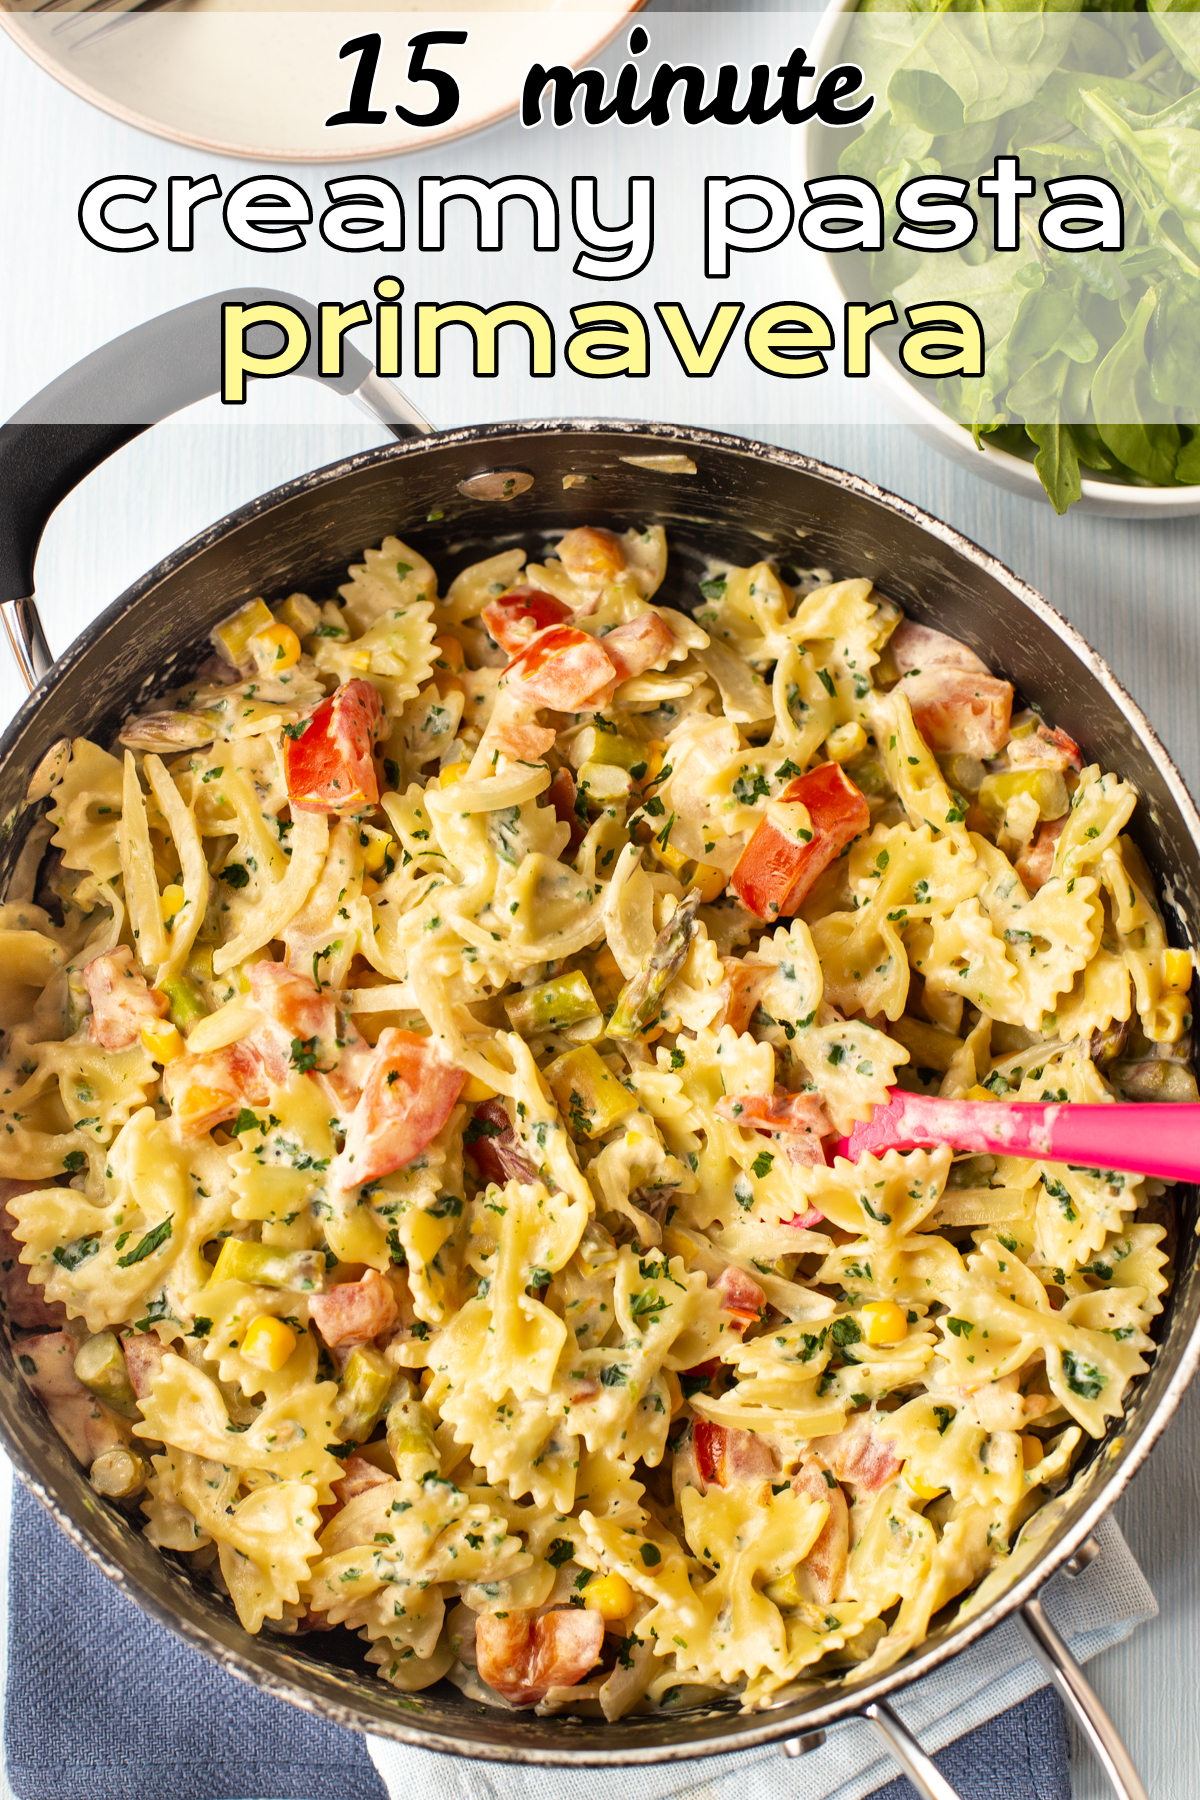 Pasta primavera with vegetables and a creamy sauce in a pan.